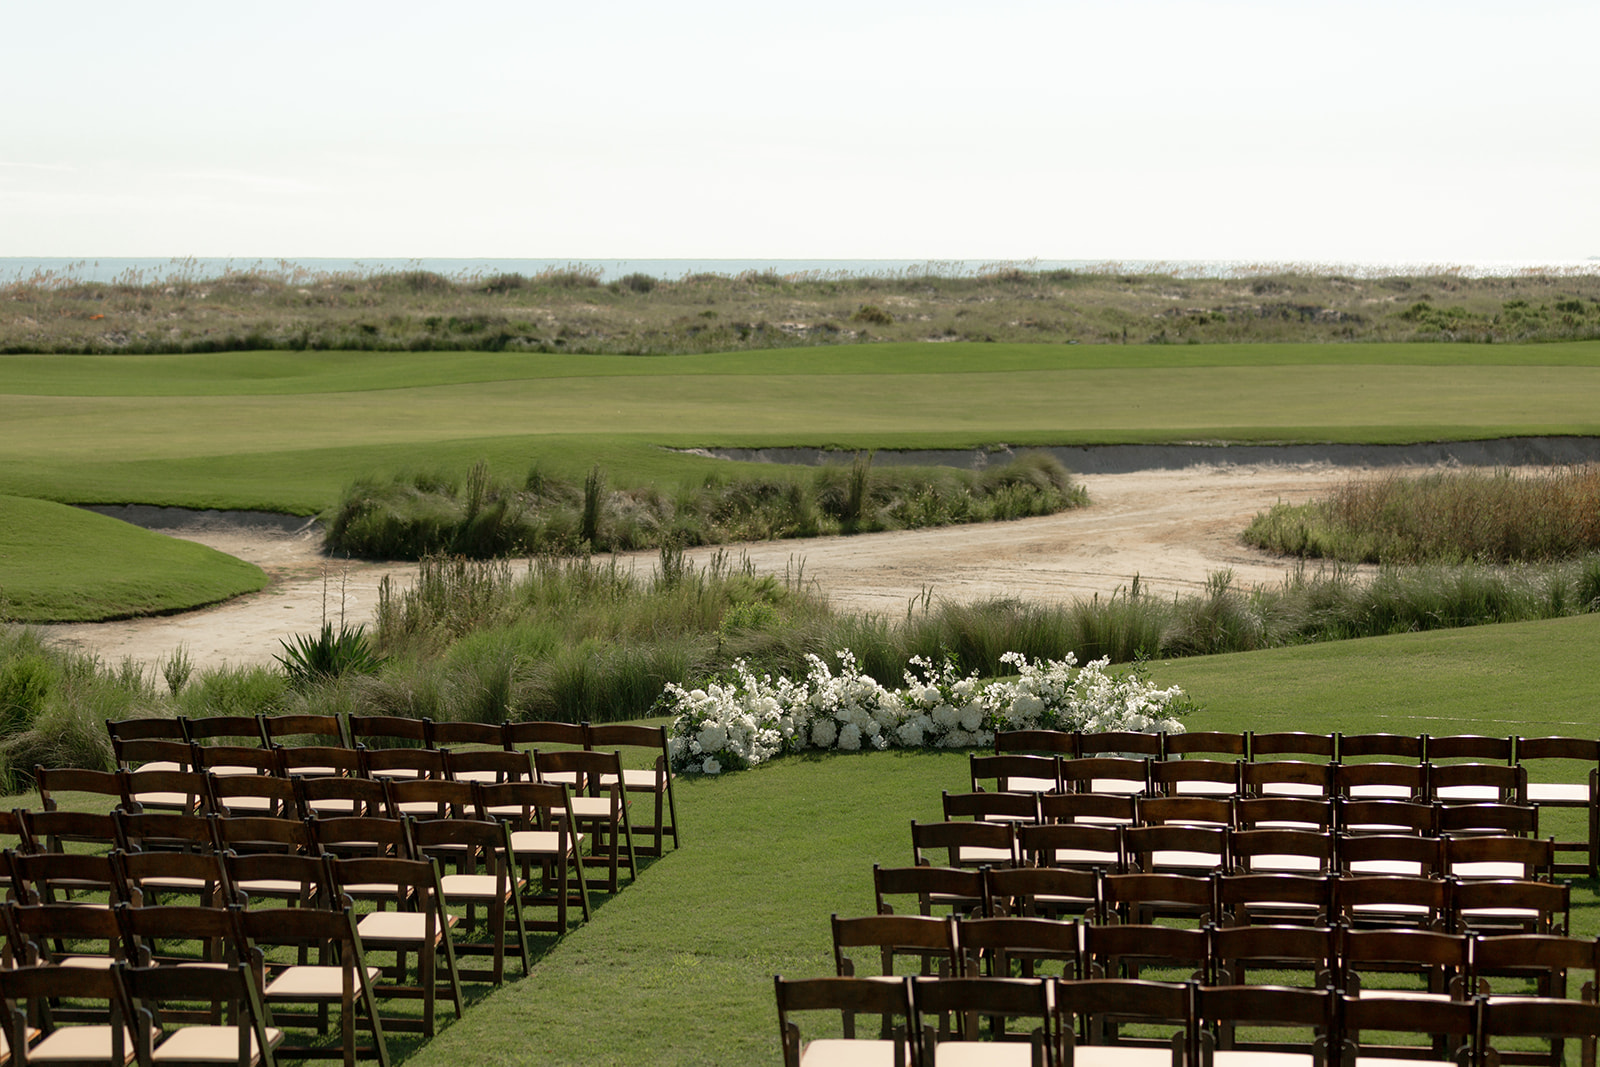 Wedding ceremony setup at Kiawah Island with Ocean Course in the background